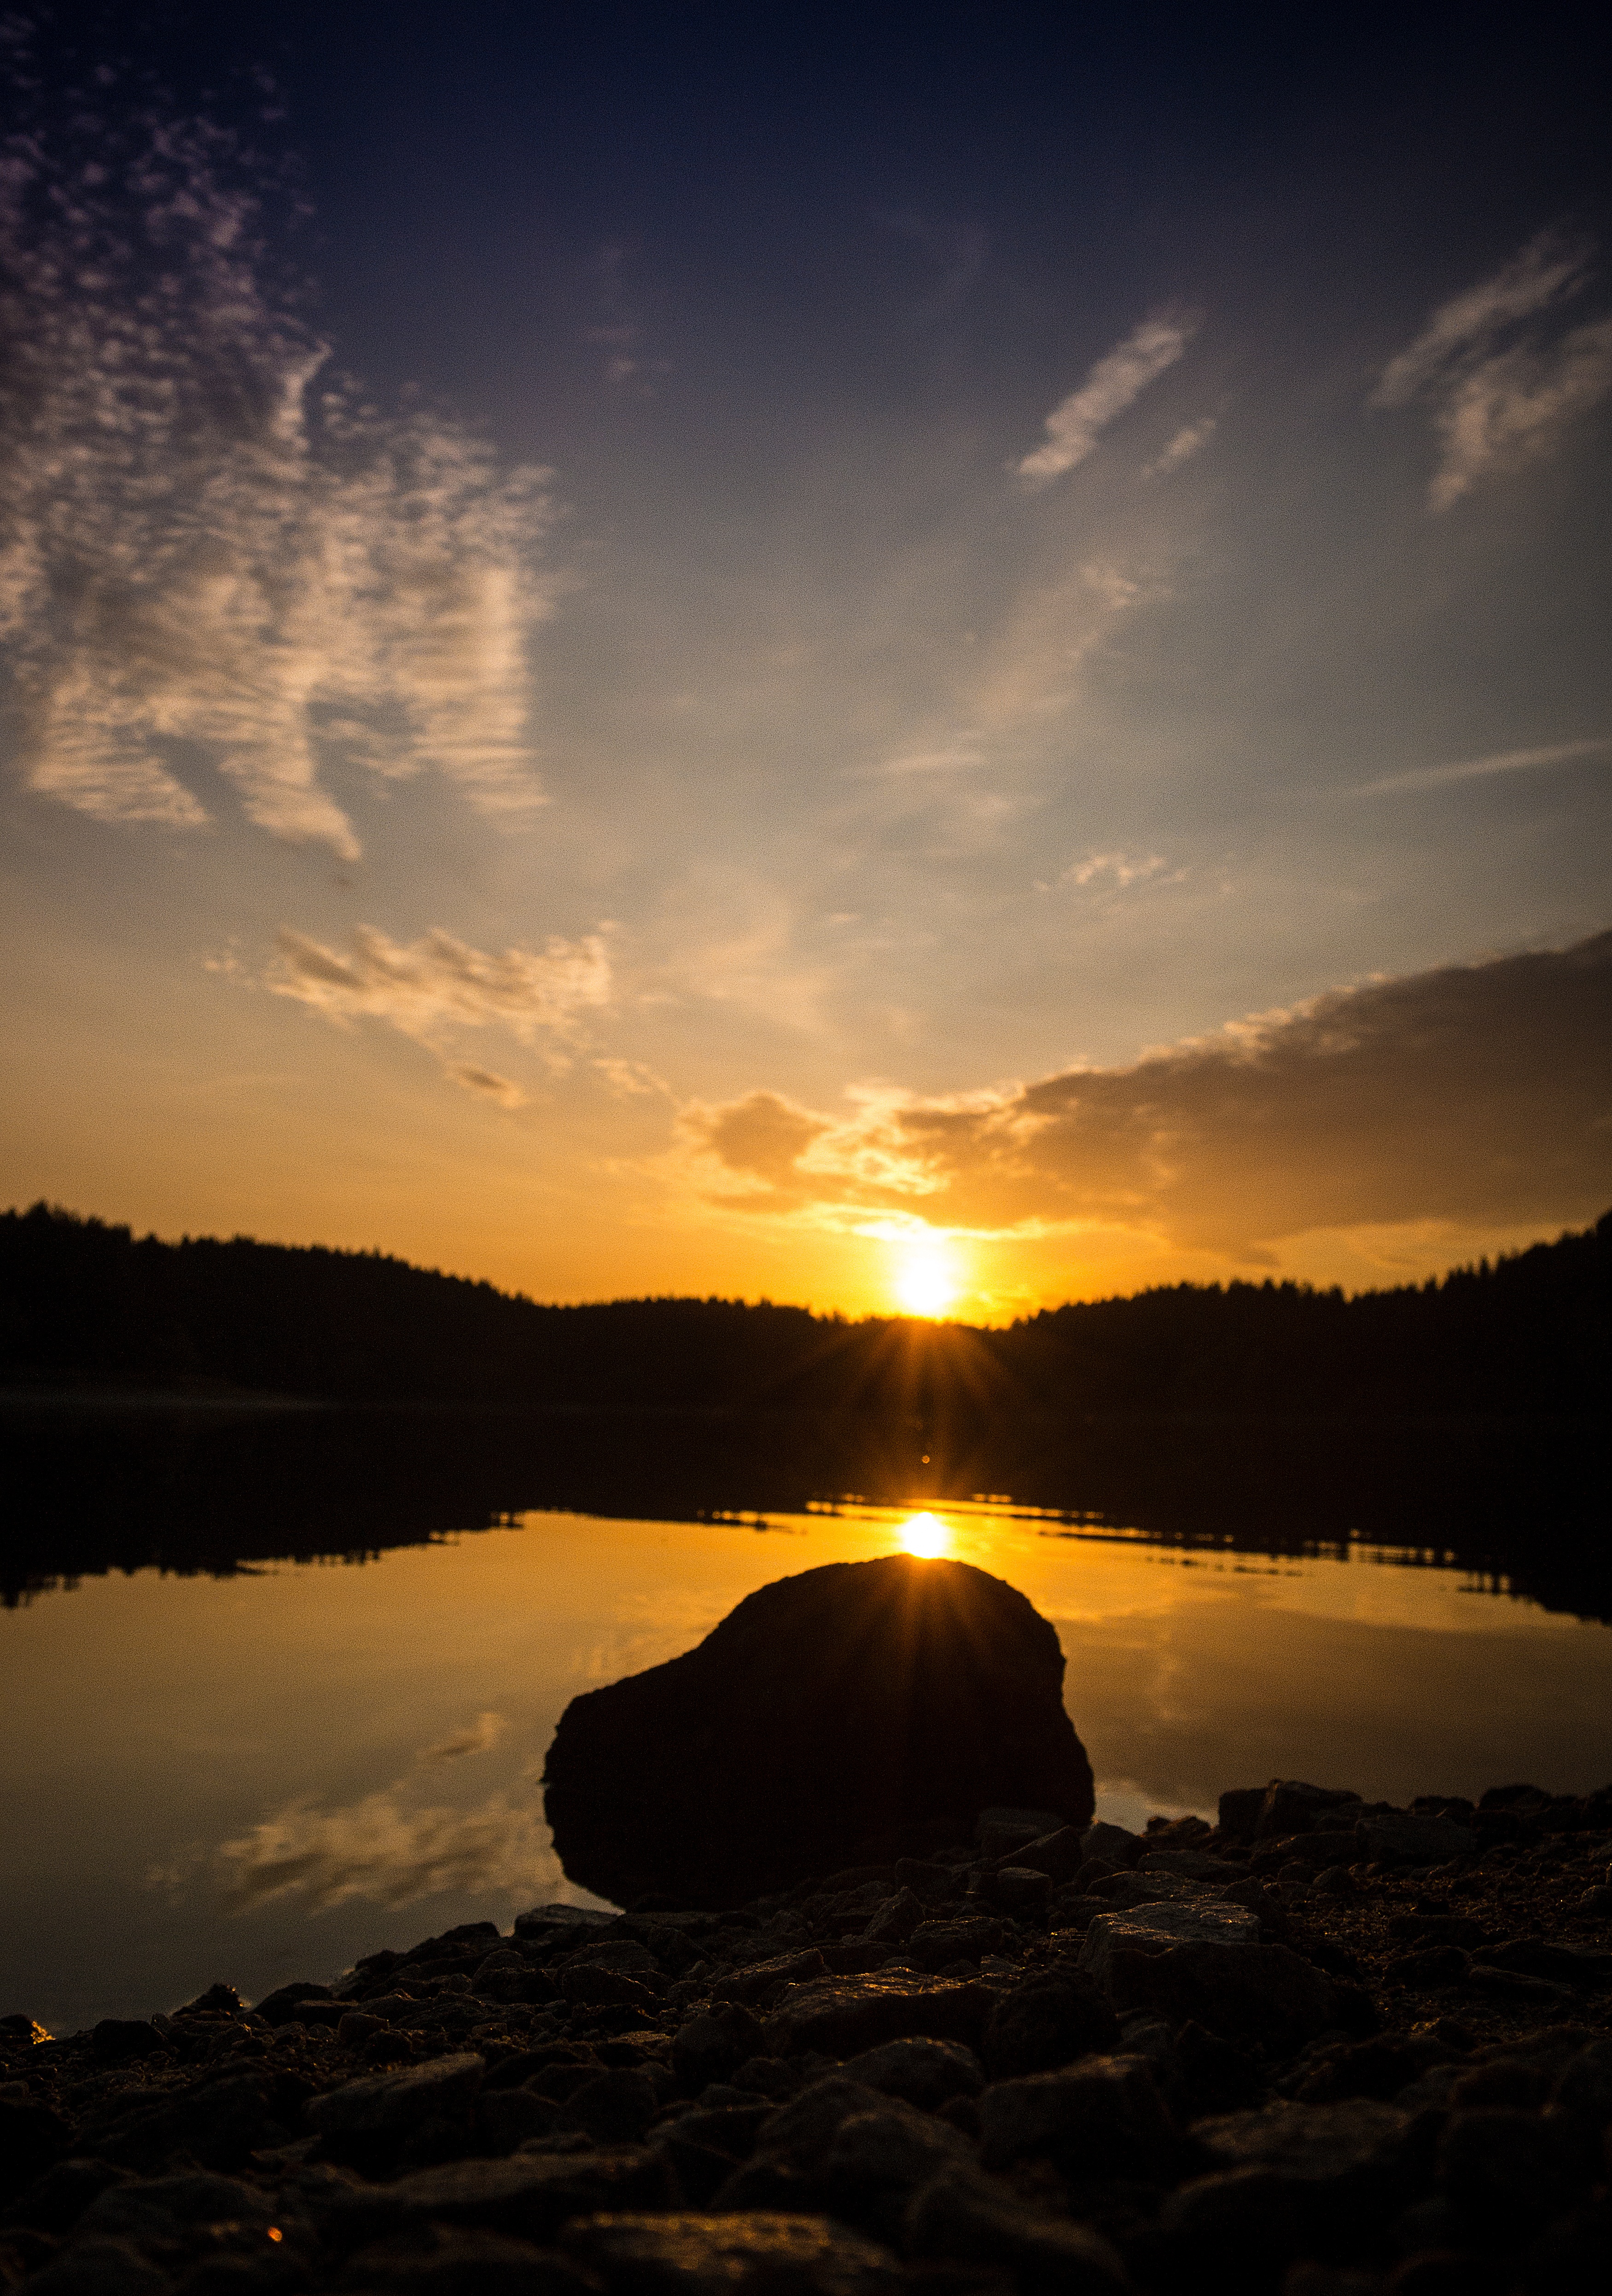 Download background stone, nature, sunset, sky, sun, rock, lake, reflection, shore, bank, forest